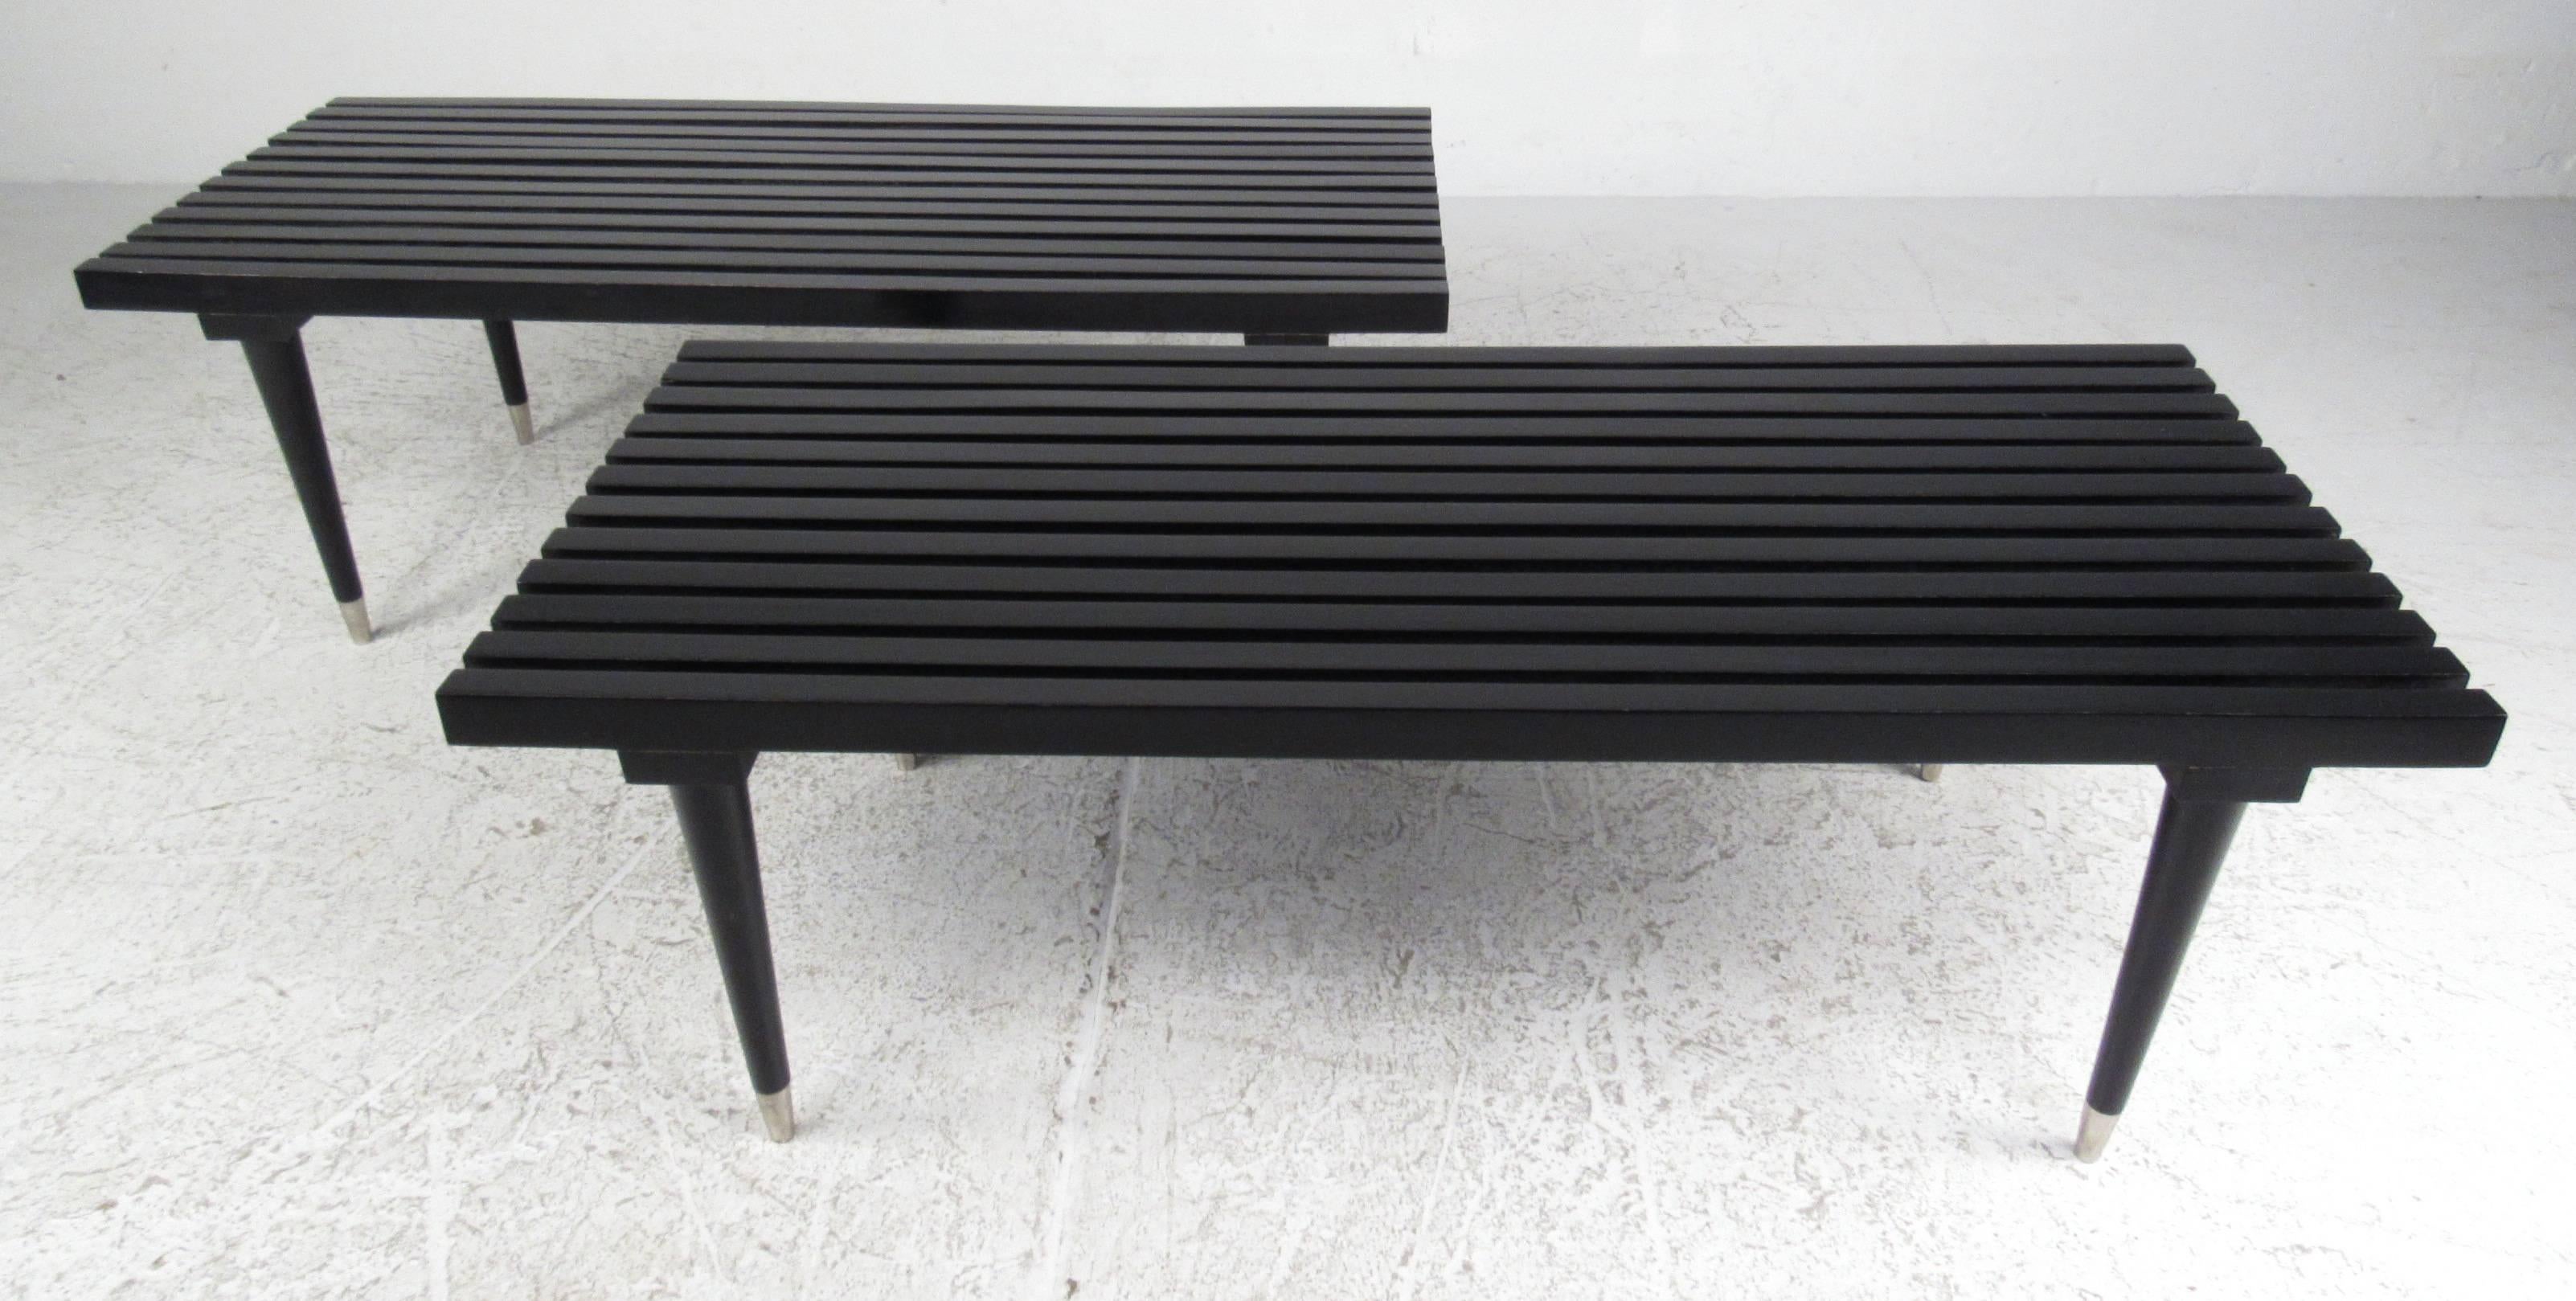 Classic Mid-Century Modern style black ebonized slat benches with tapered legs and silver leg caps. Price is for one bench. Please confirm item location (NY or NJ) with dealer.